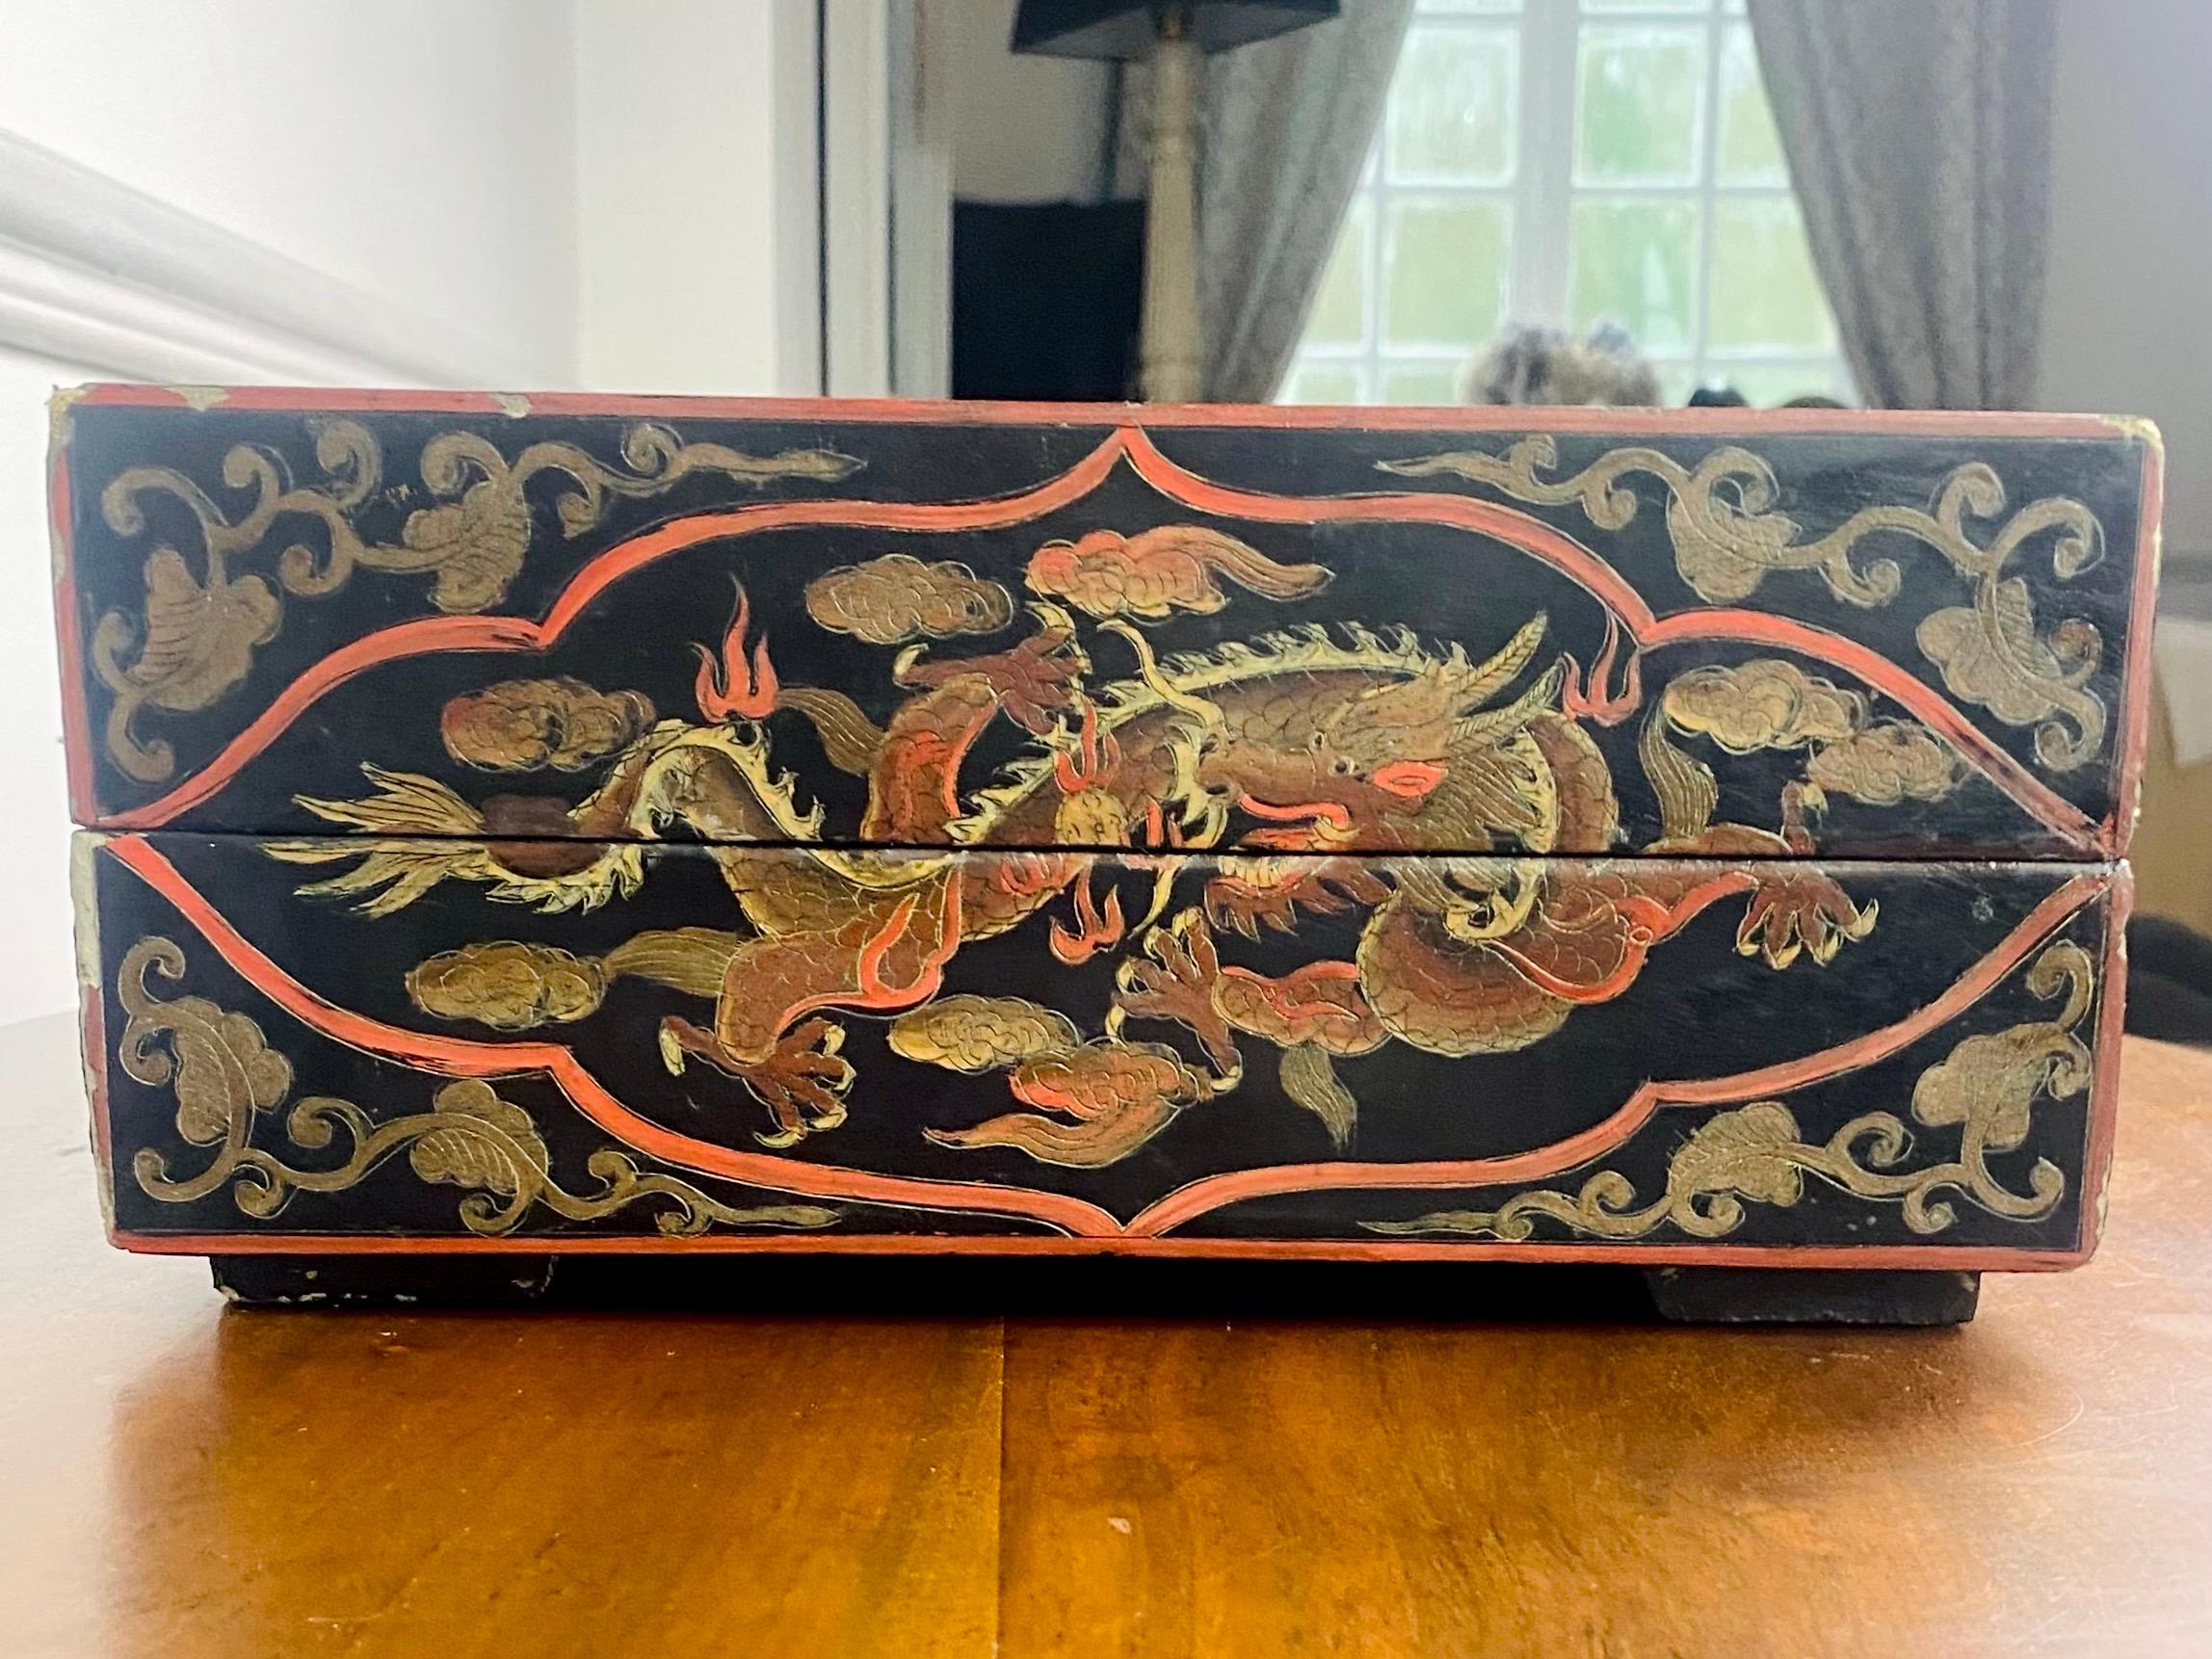 Magnificent box Imperial jewelry box in black lacquered wood decorated with dragons.
This wonderful box is lacquered on a black background with patterns painted in red, green, white and gold on the lid and around. The decoration consists of two